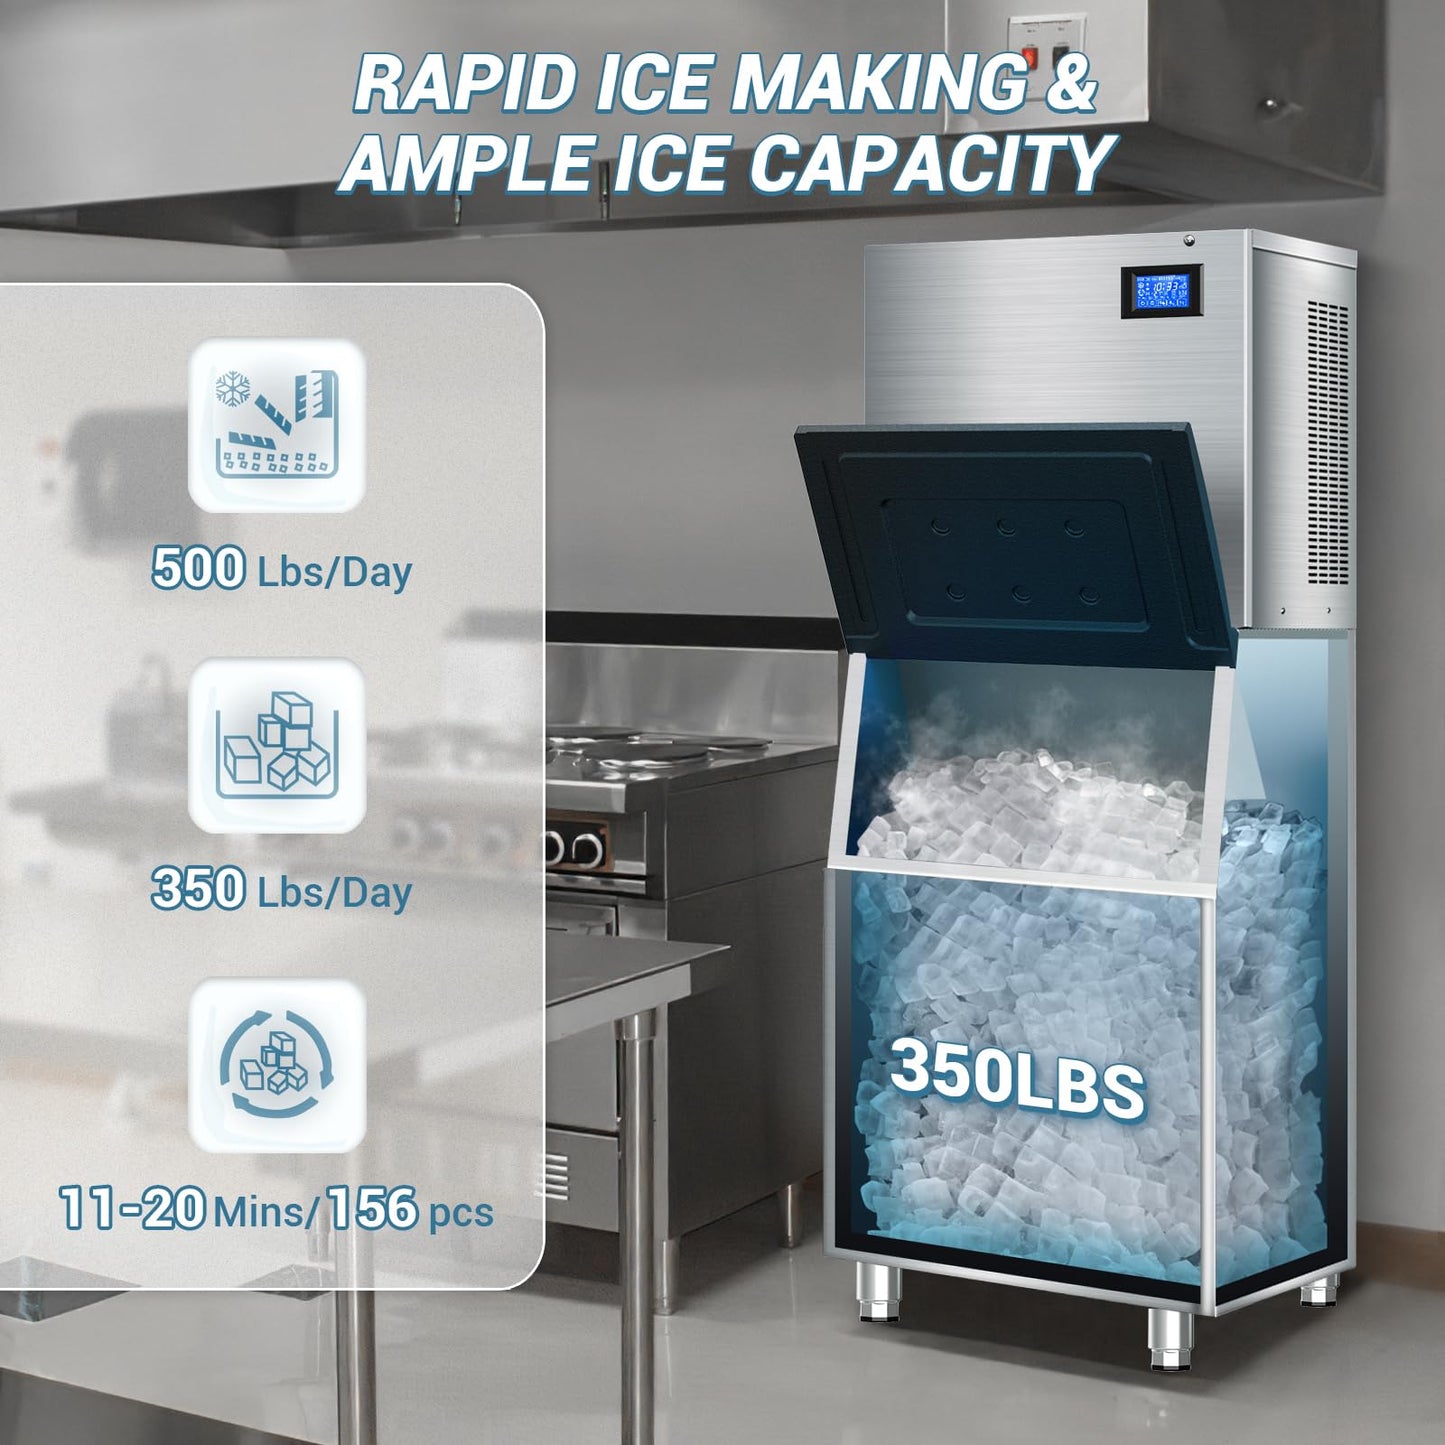 Large Commercial Ice Maker Machine: 500lbs/24H Production, with 350lbs Ice Storage Bucket, 156 Ice Cubes in 6-15 Mins - Stainless Steel Industrial Ice Maker for Restaurant, Bar, Cafe, Commercial Use